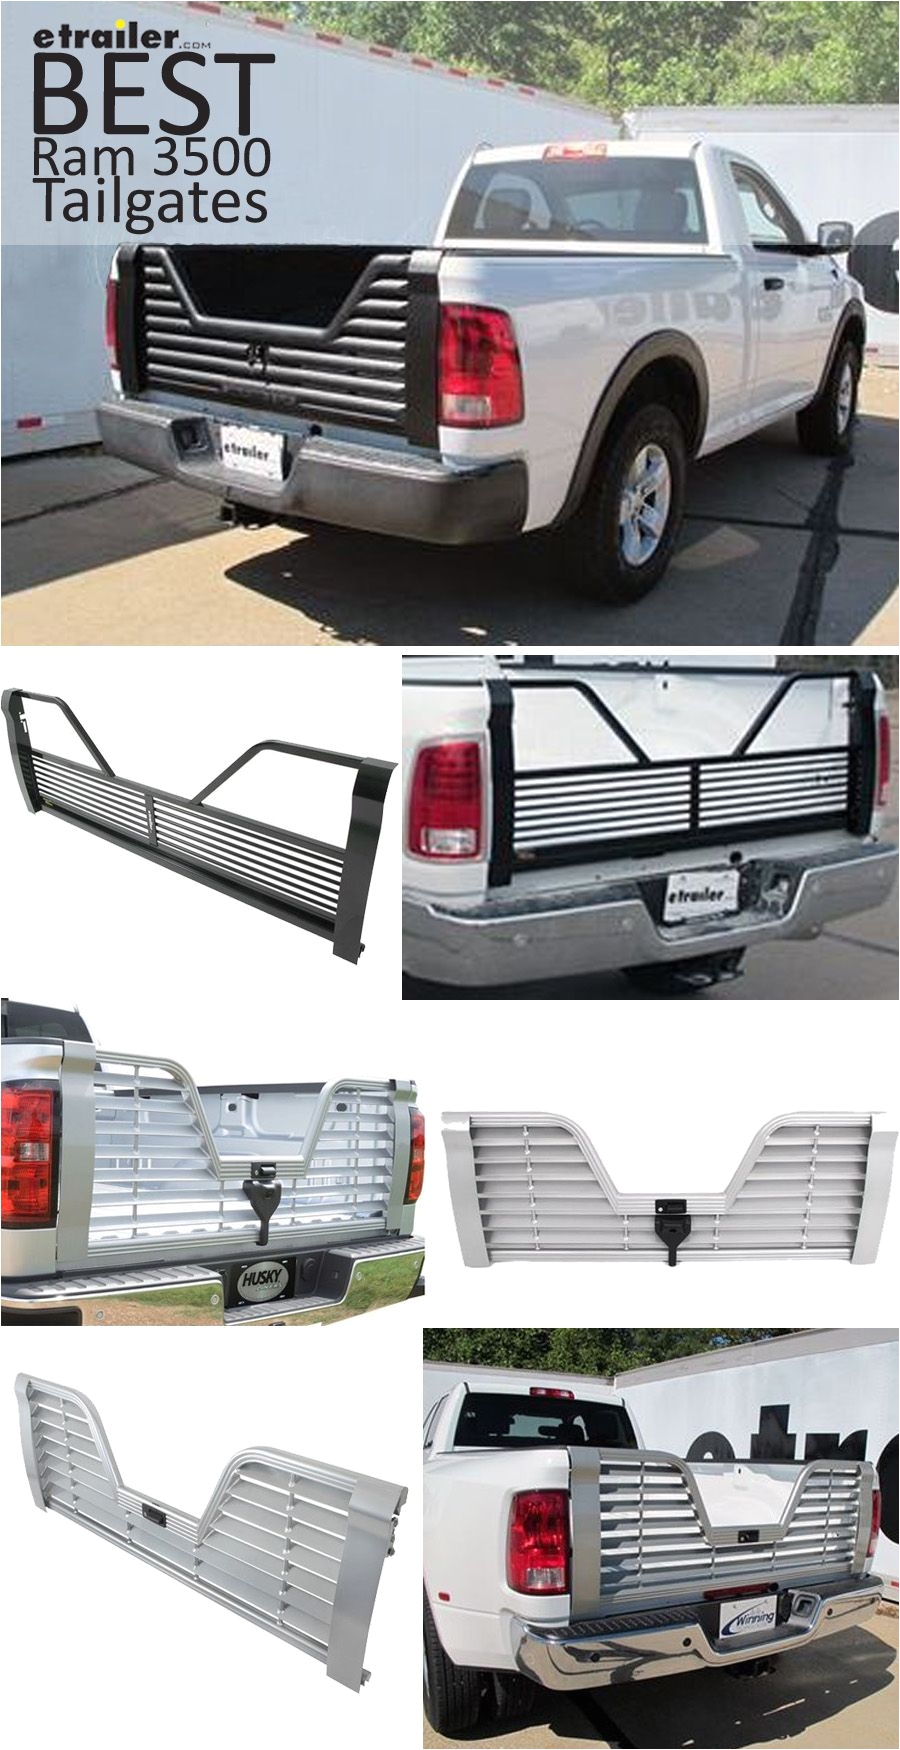 Dodge Ram Headache Rack with Lights Here are the Best Tailgates and Tailgate Accessories for Your Dodge